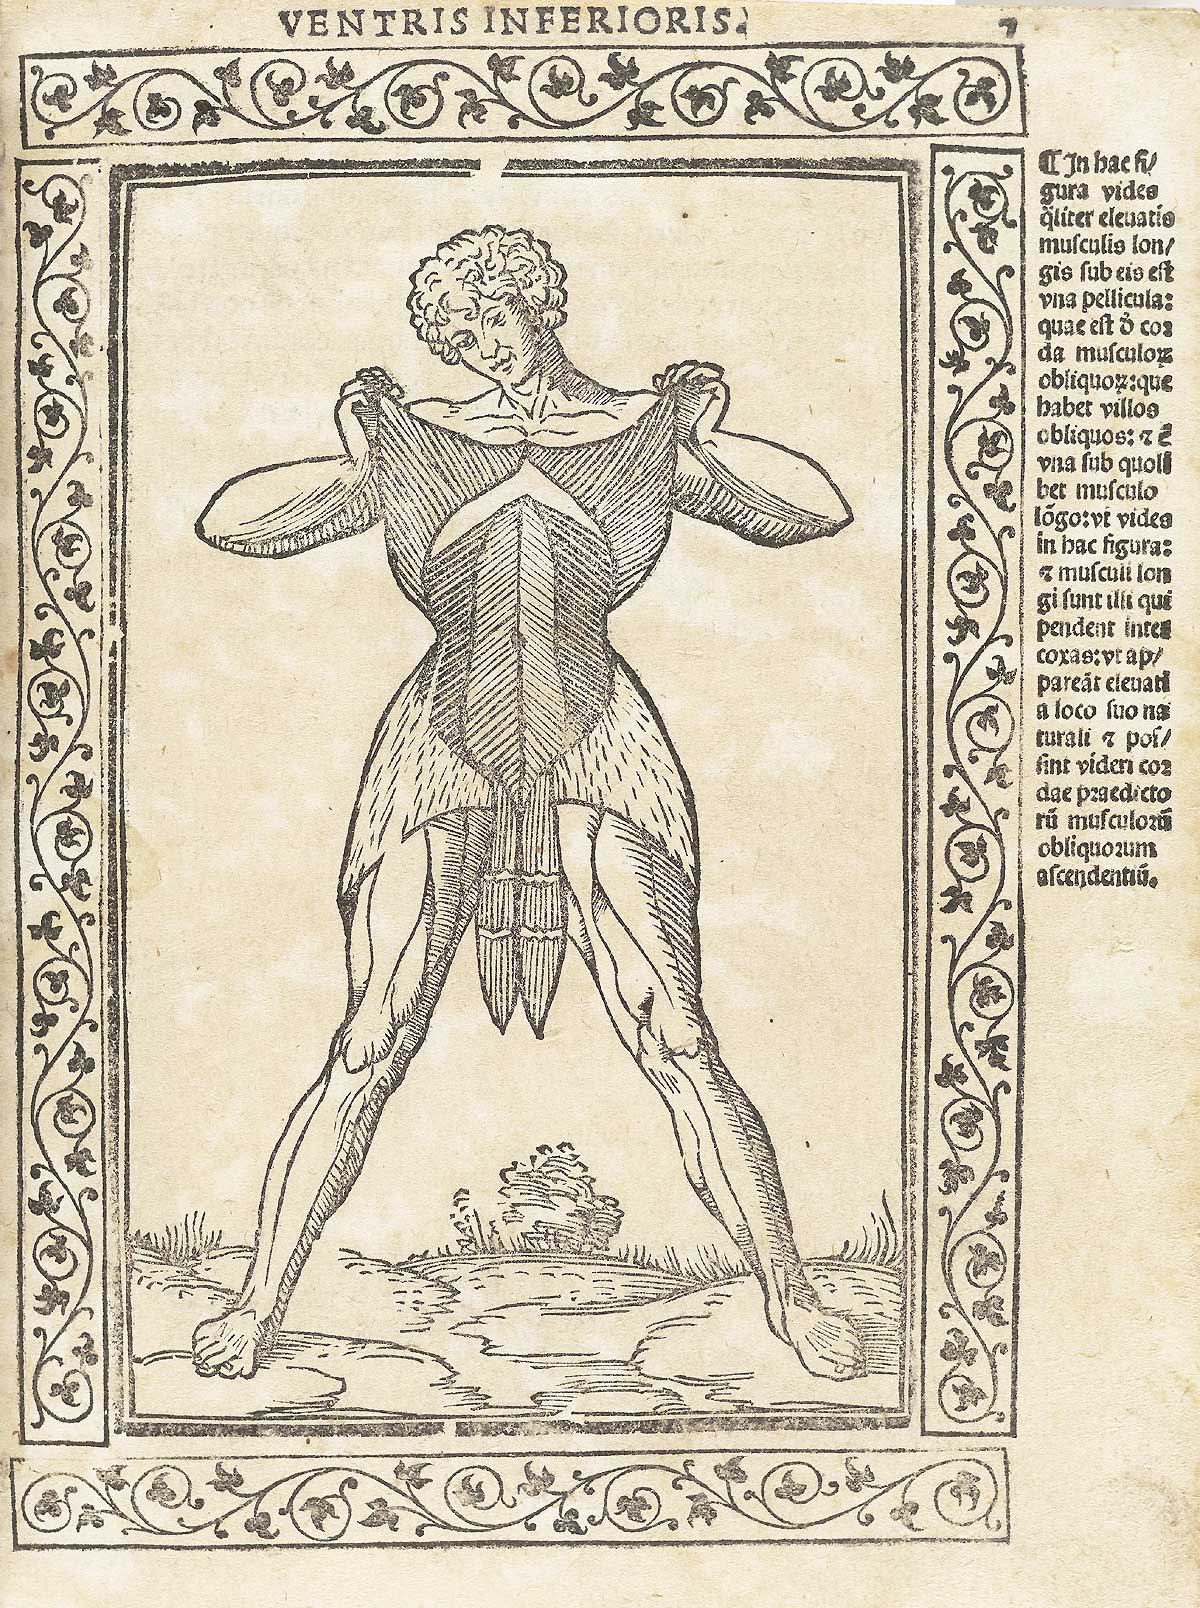 Woodcut of male anatomical figure raising the skin to give a view of his oblique and abdominal muscles, with a woodcut border and text in Latin on the right side of page, from Berengario da Carpi’s Isagogae breues, Bologna, 1523, NLM Call no. WZ 240 B488i 1523.